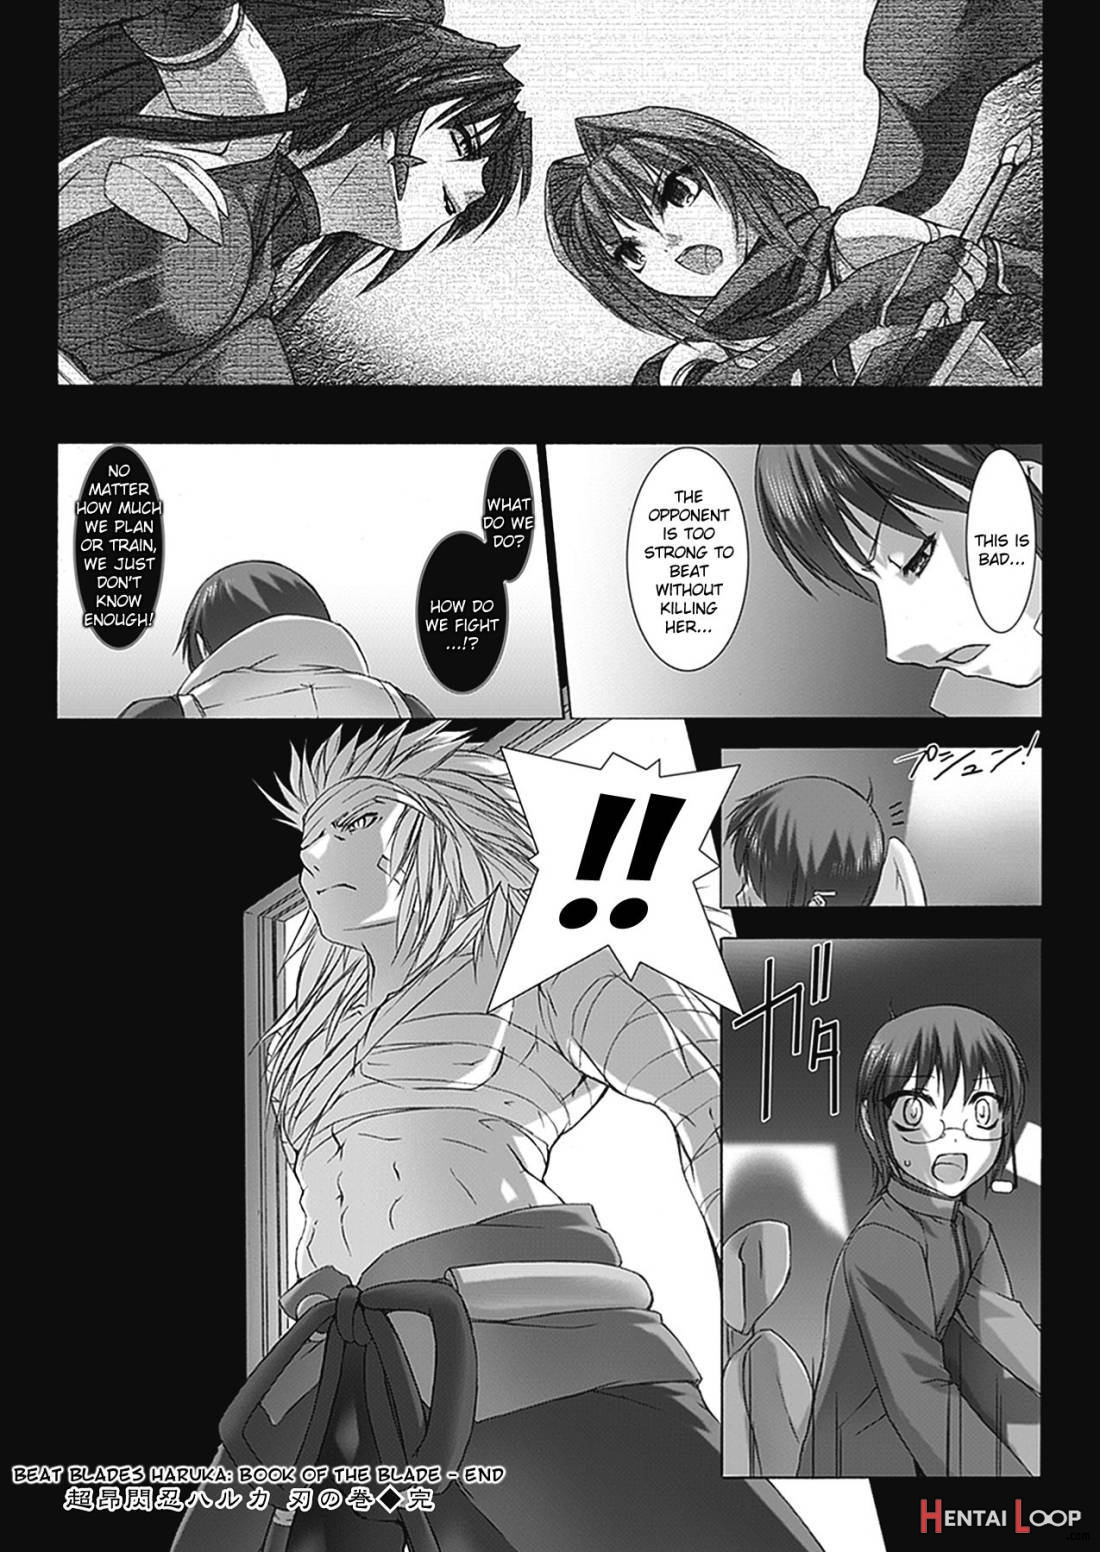 Beat Blades Haruka: Book of the Blade page 173